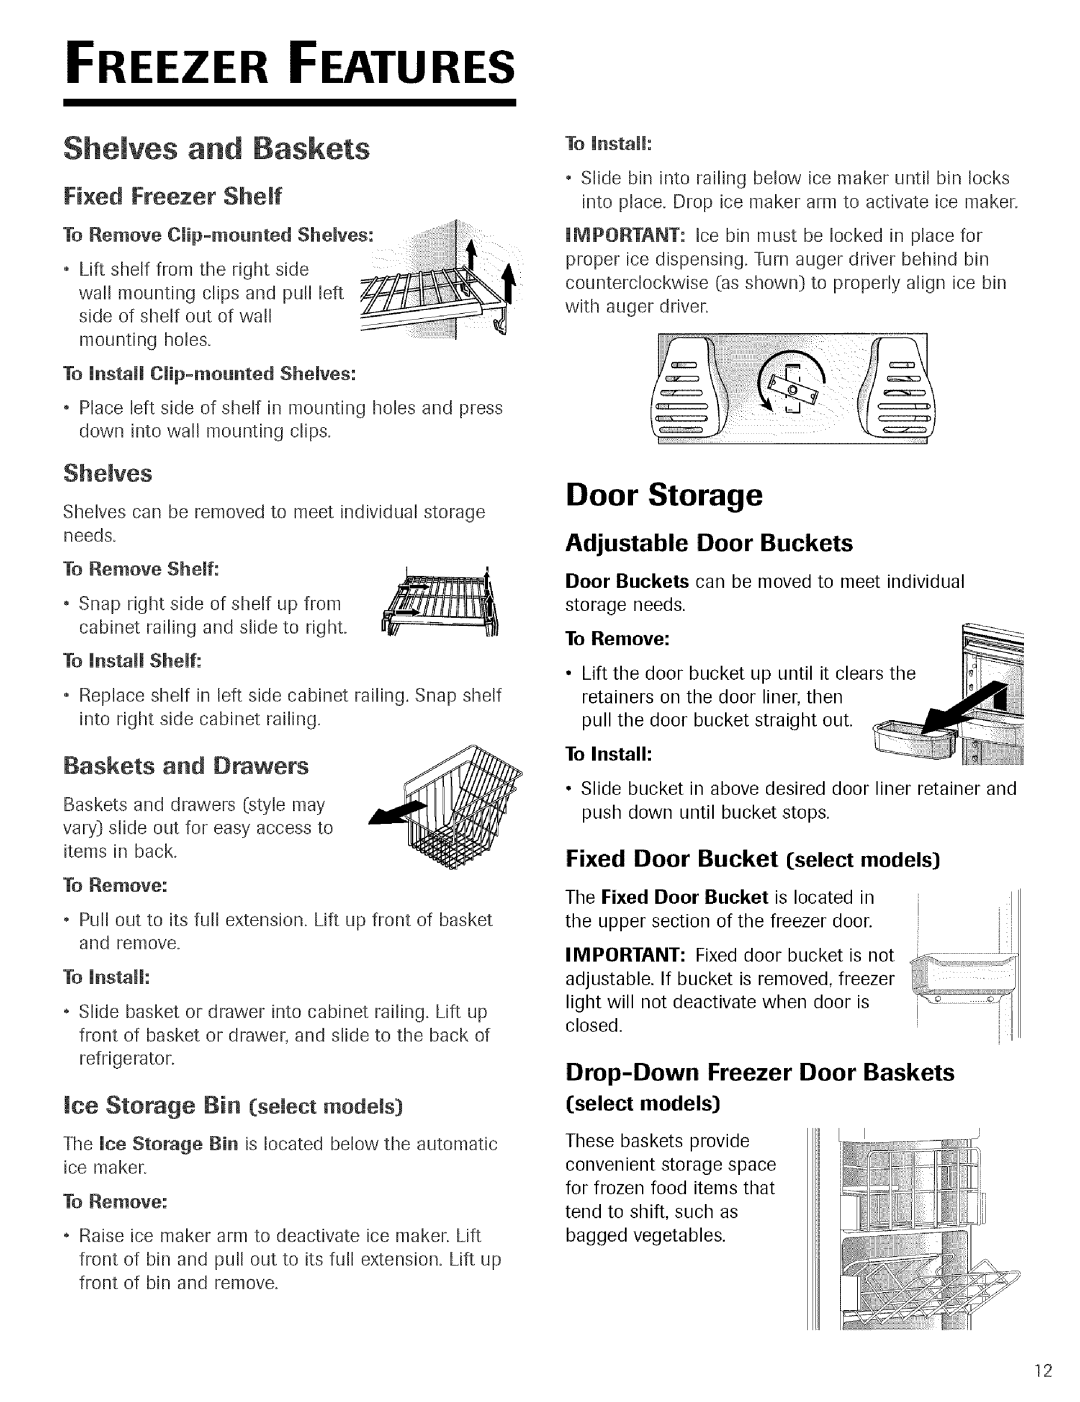 Jenn-Air Refrigerator Freezer Features, Shelves and gaskets, Fixed Freezer Shelf, Baskets and Drawers, Door Storage 